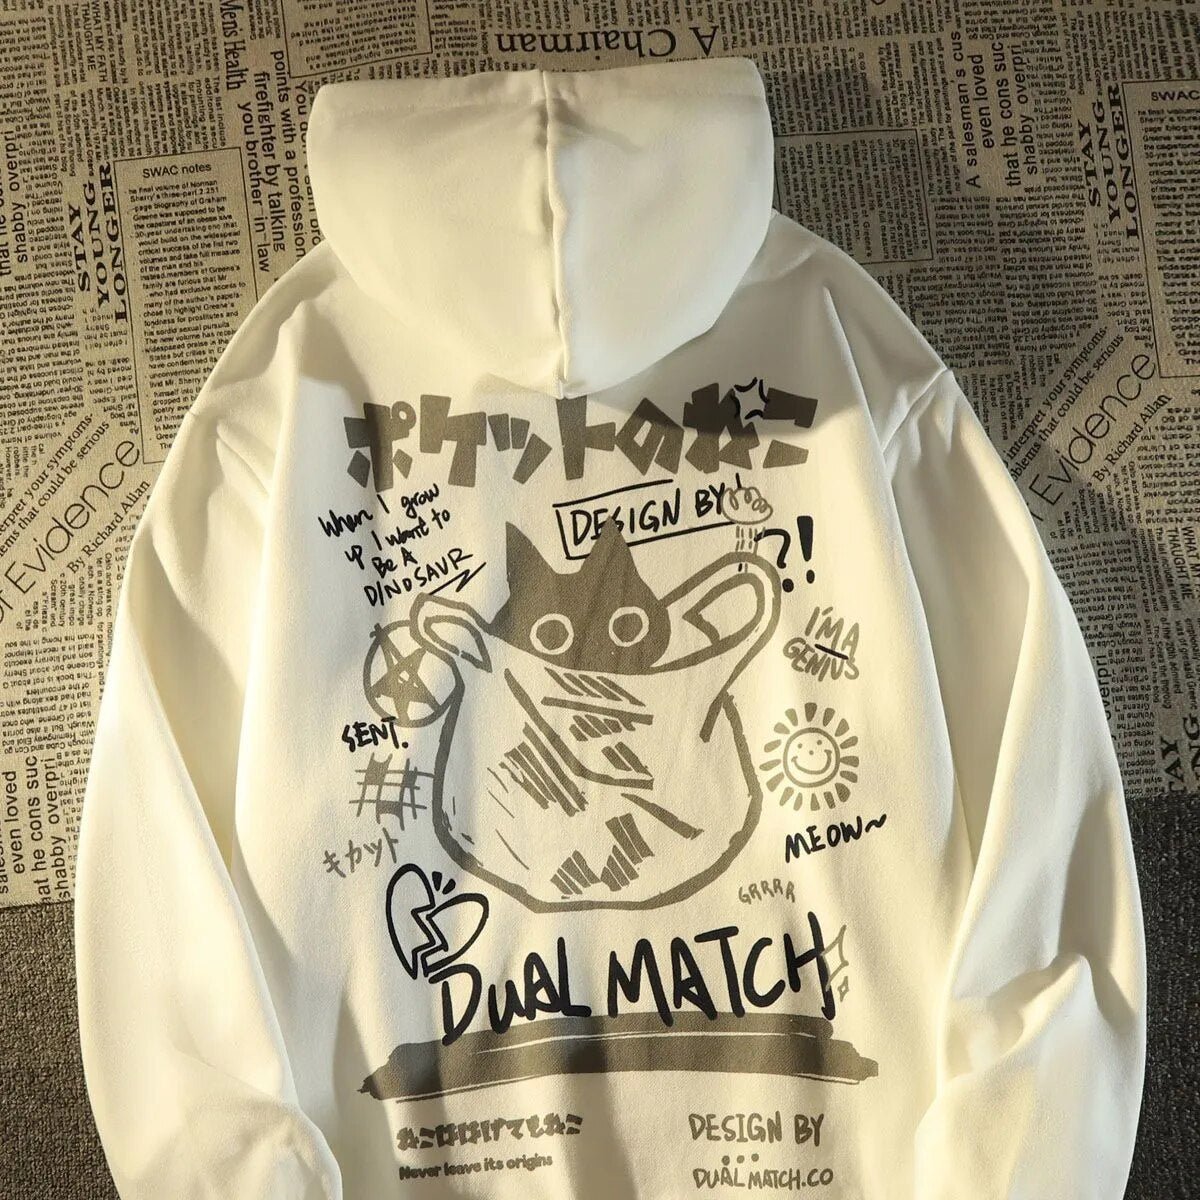 Hand-drawn graphics on a hoodie with doodles and a central black cat design